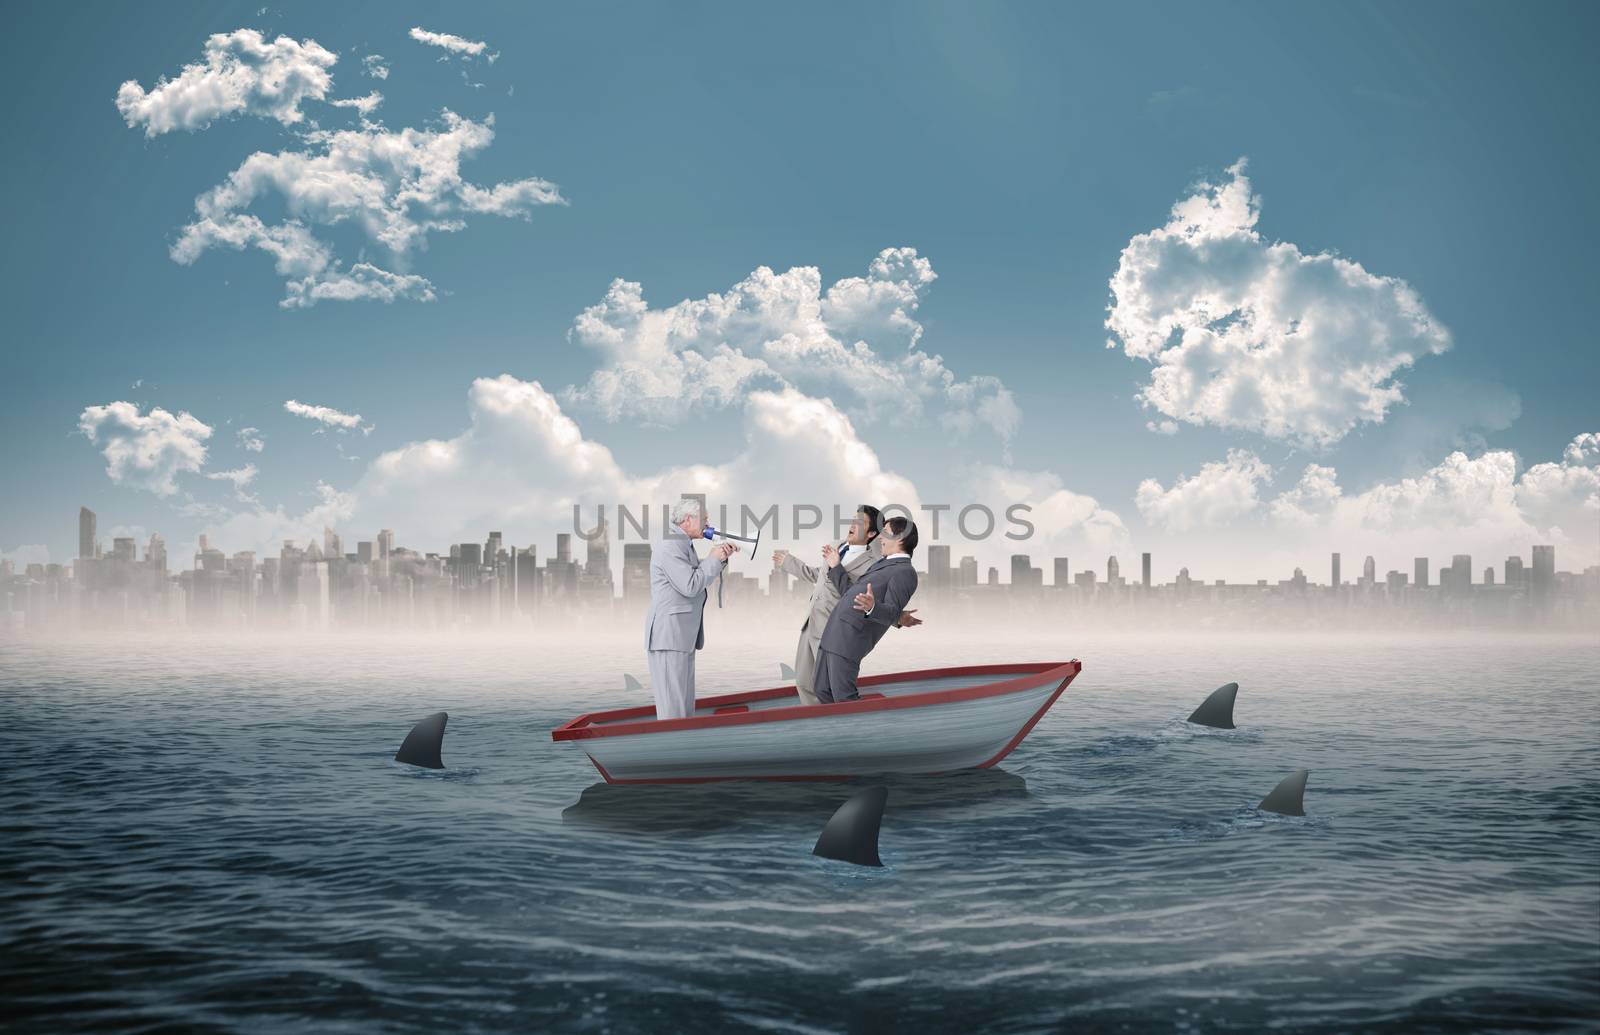 Composite image of senior salesman with megaphone yelling at his employees in a sailboat by Wavebreakmedia